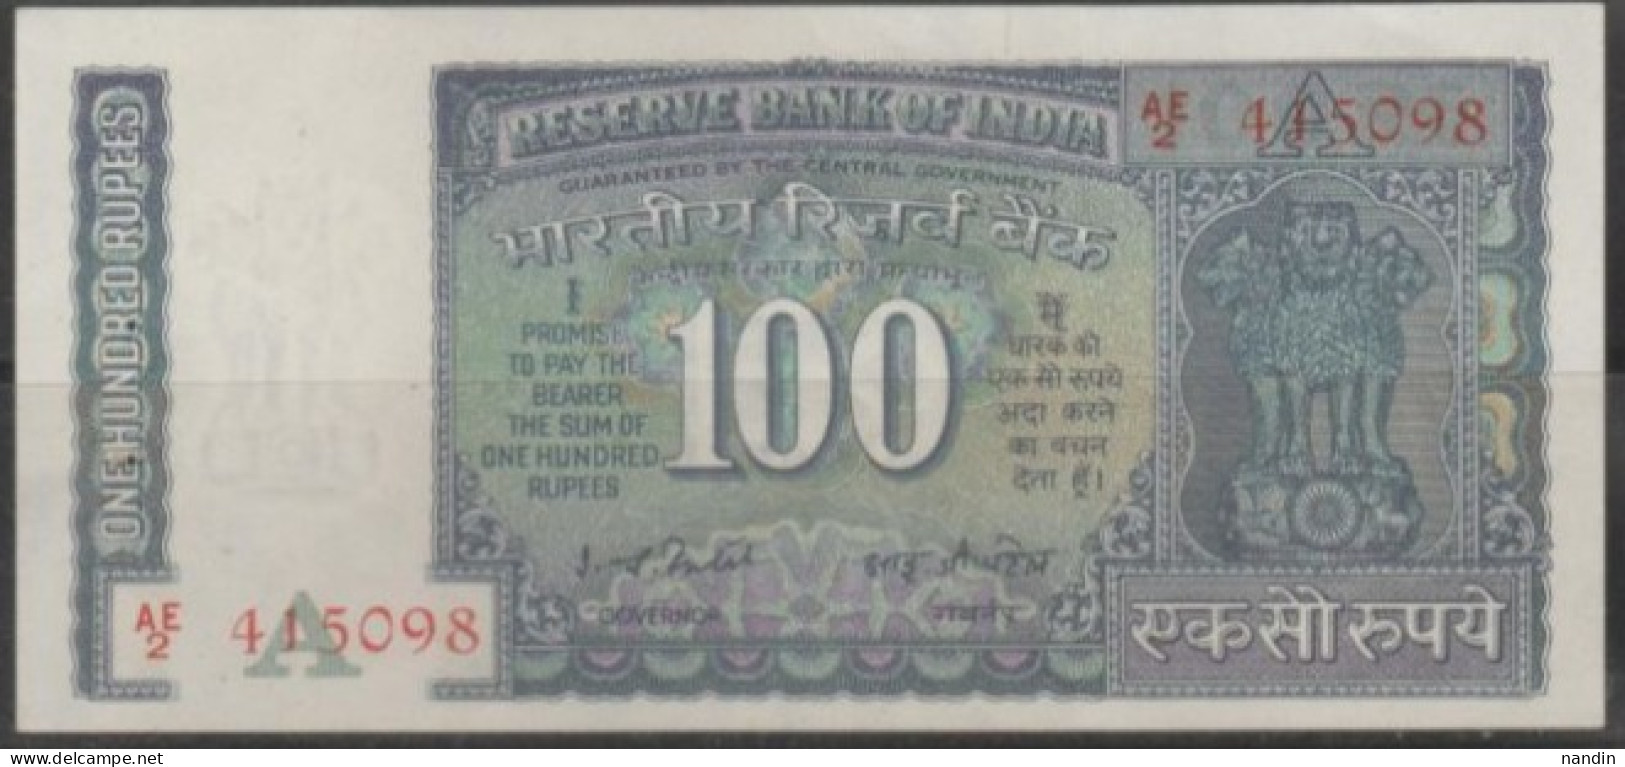 India 100 Rupees - OLD Note With Signature I.G.PATEL (1977-82) UNC Condition - Inde